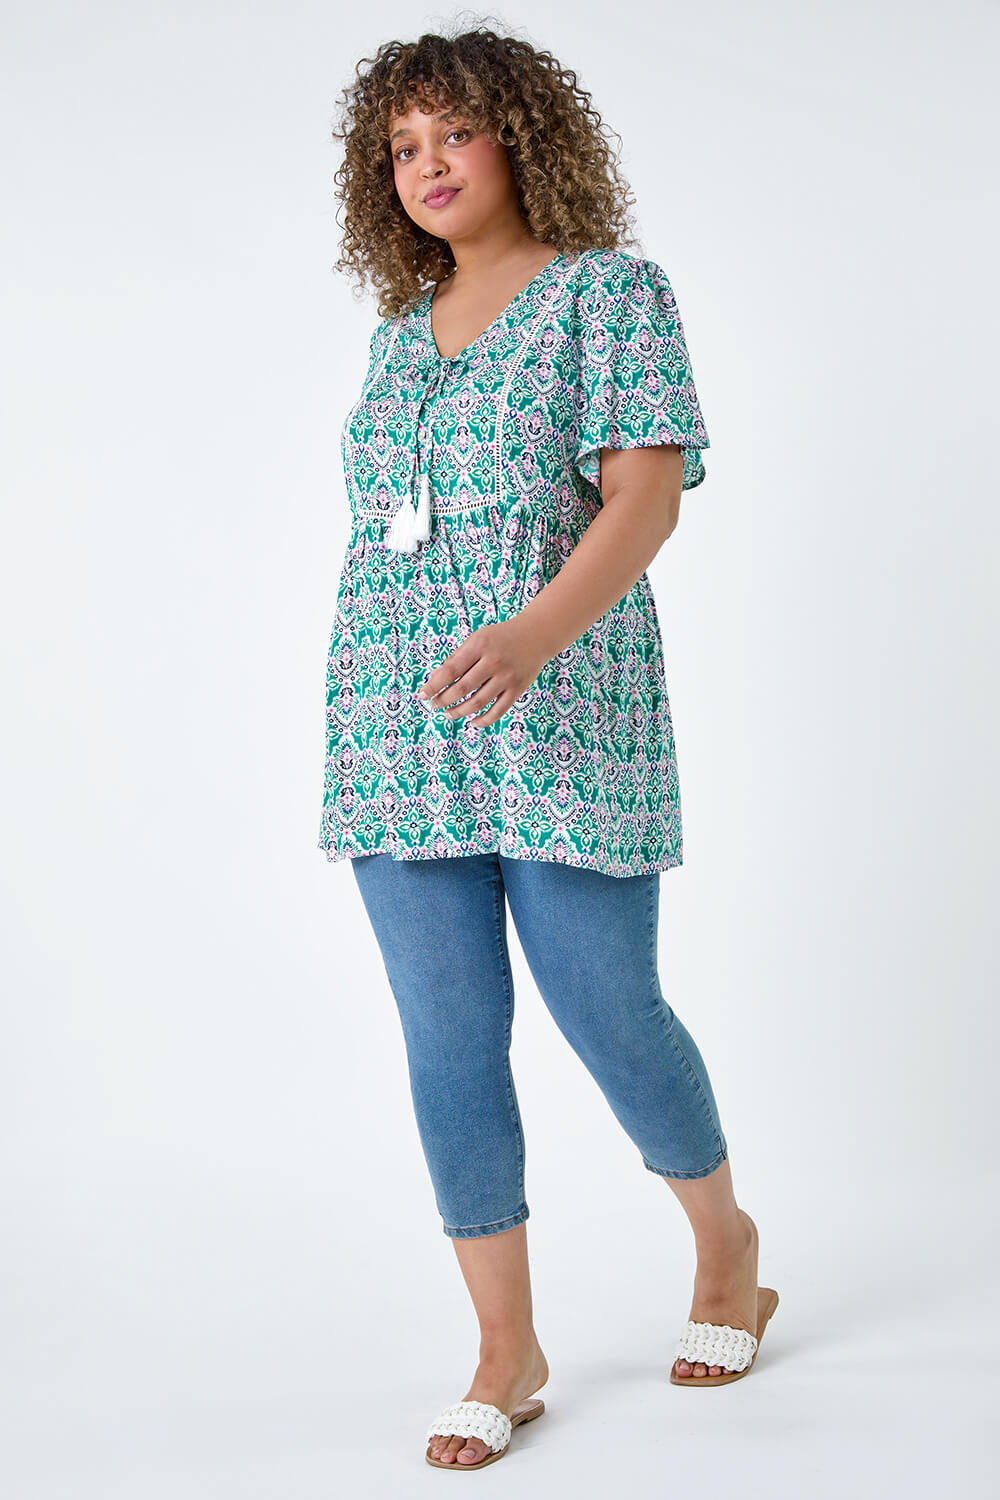 Green Curve Tie Front Boho Printed Top, Image 2 of 5